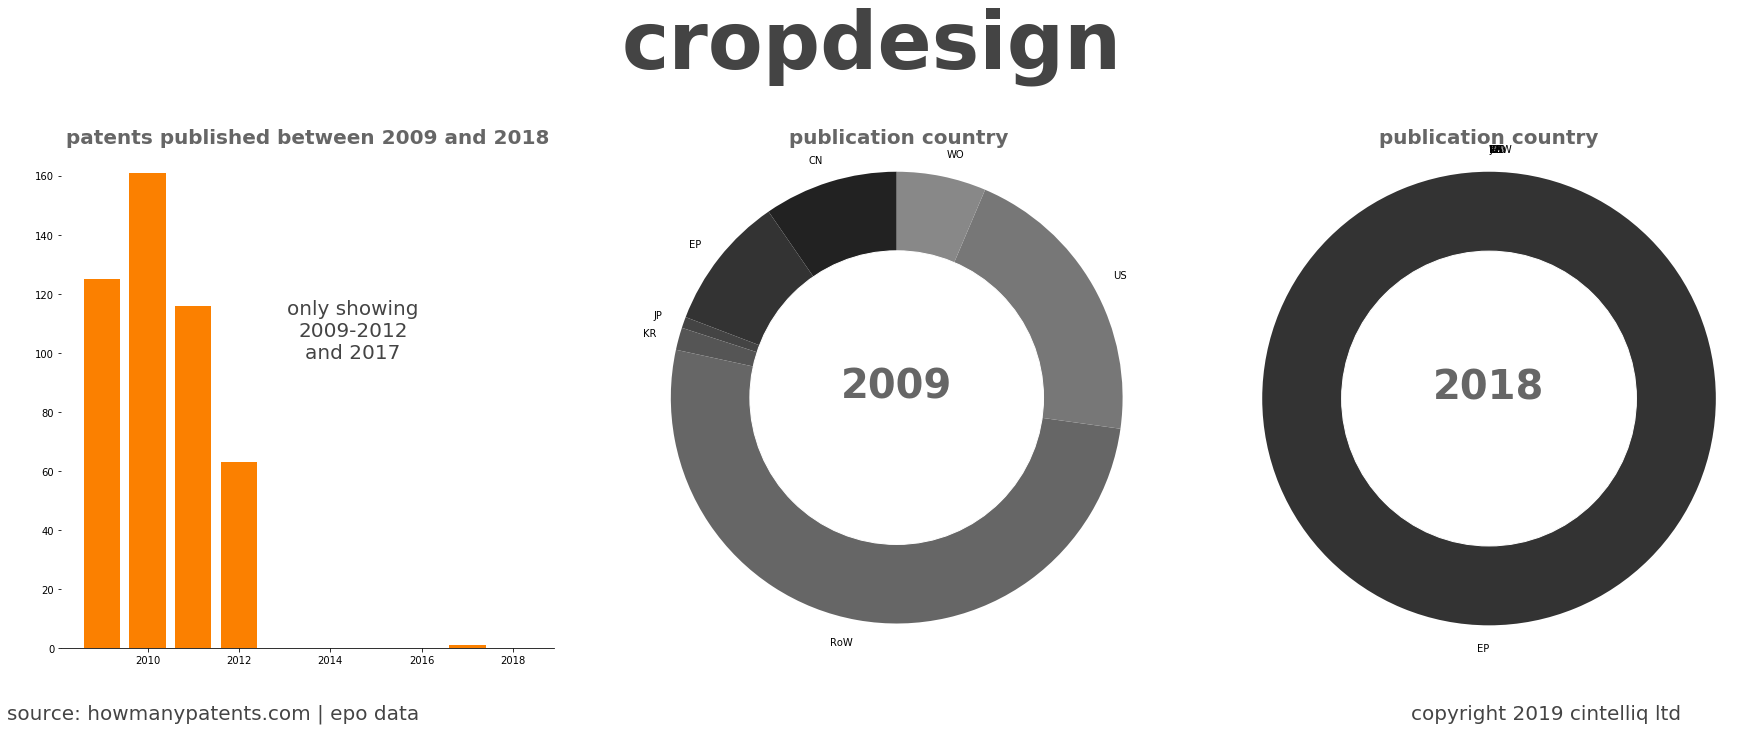 summary of patents for Cropdesign